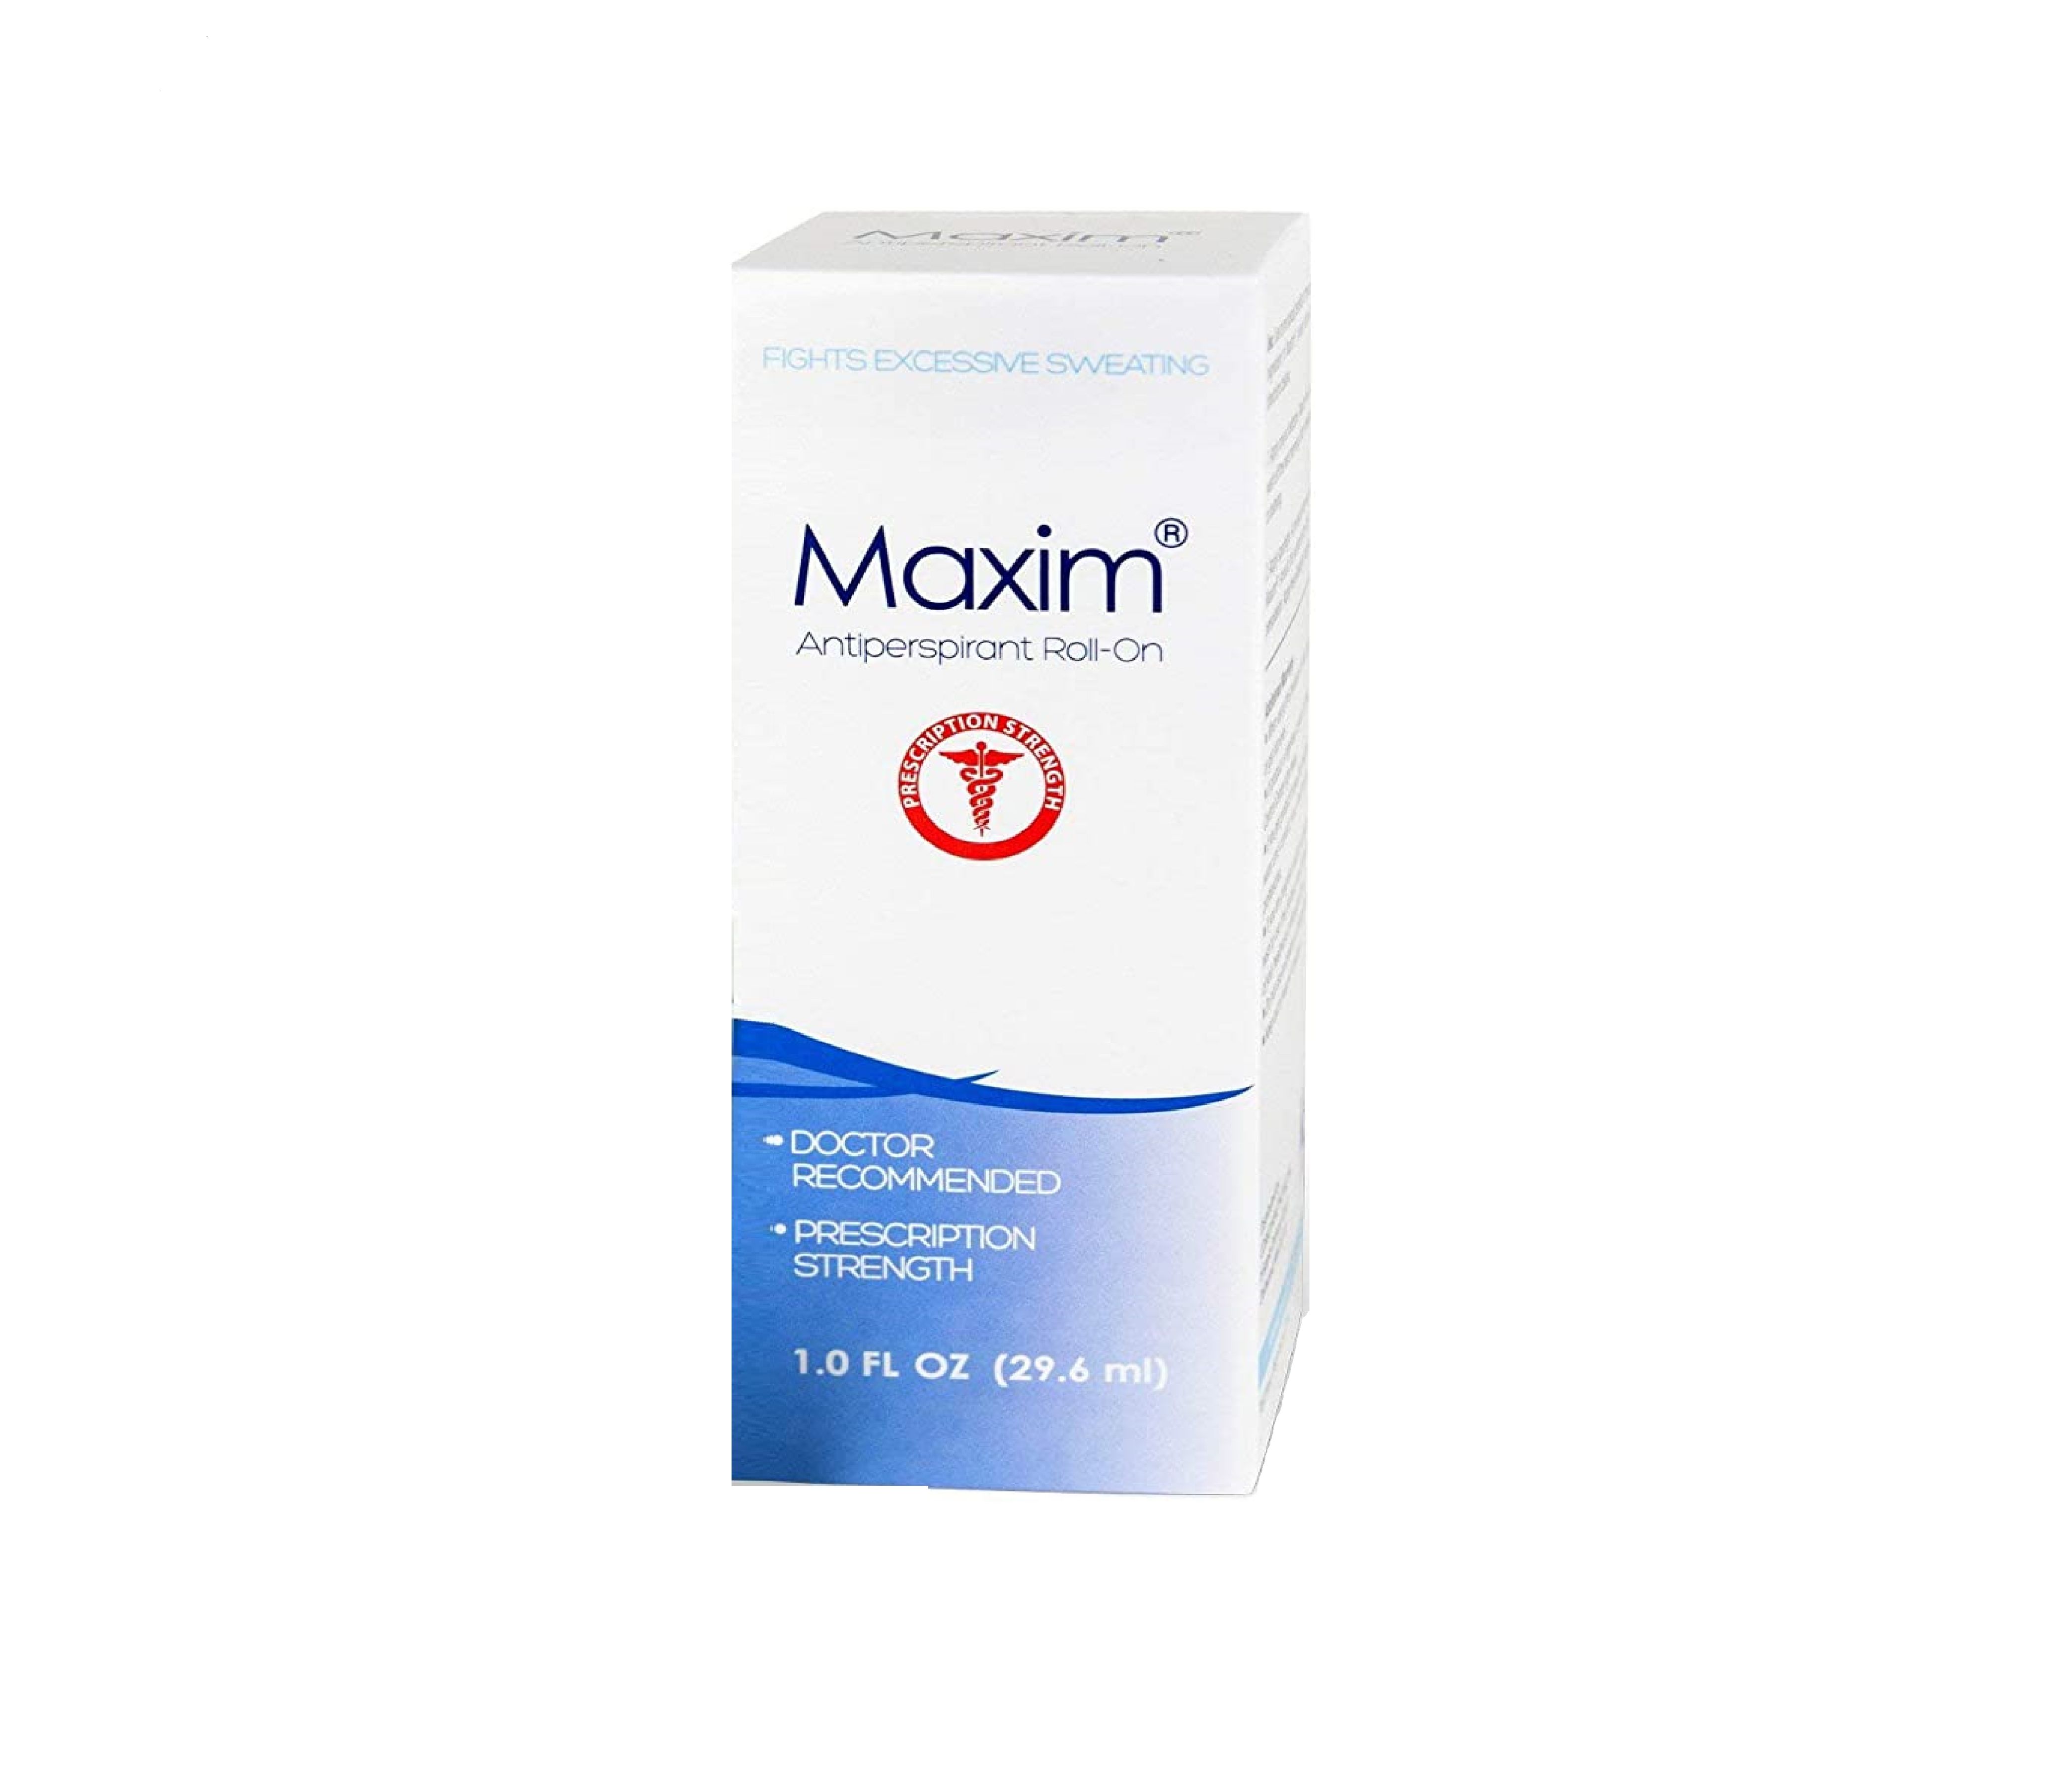 Maxim Normal Deo Roll-On29.6ml